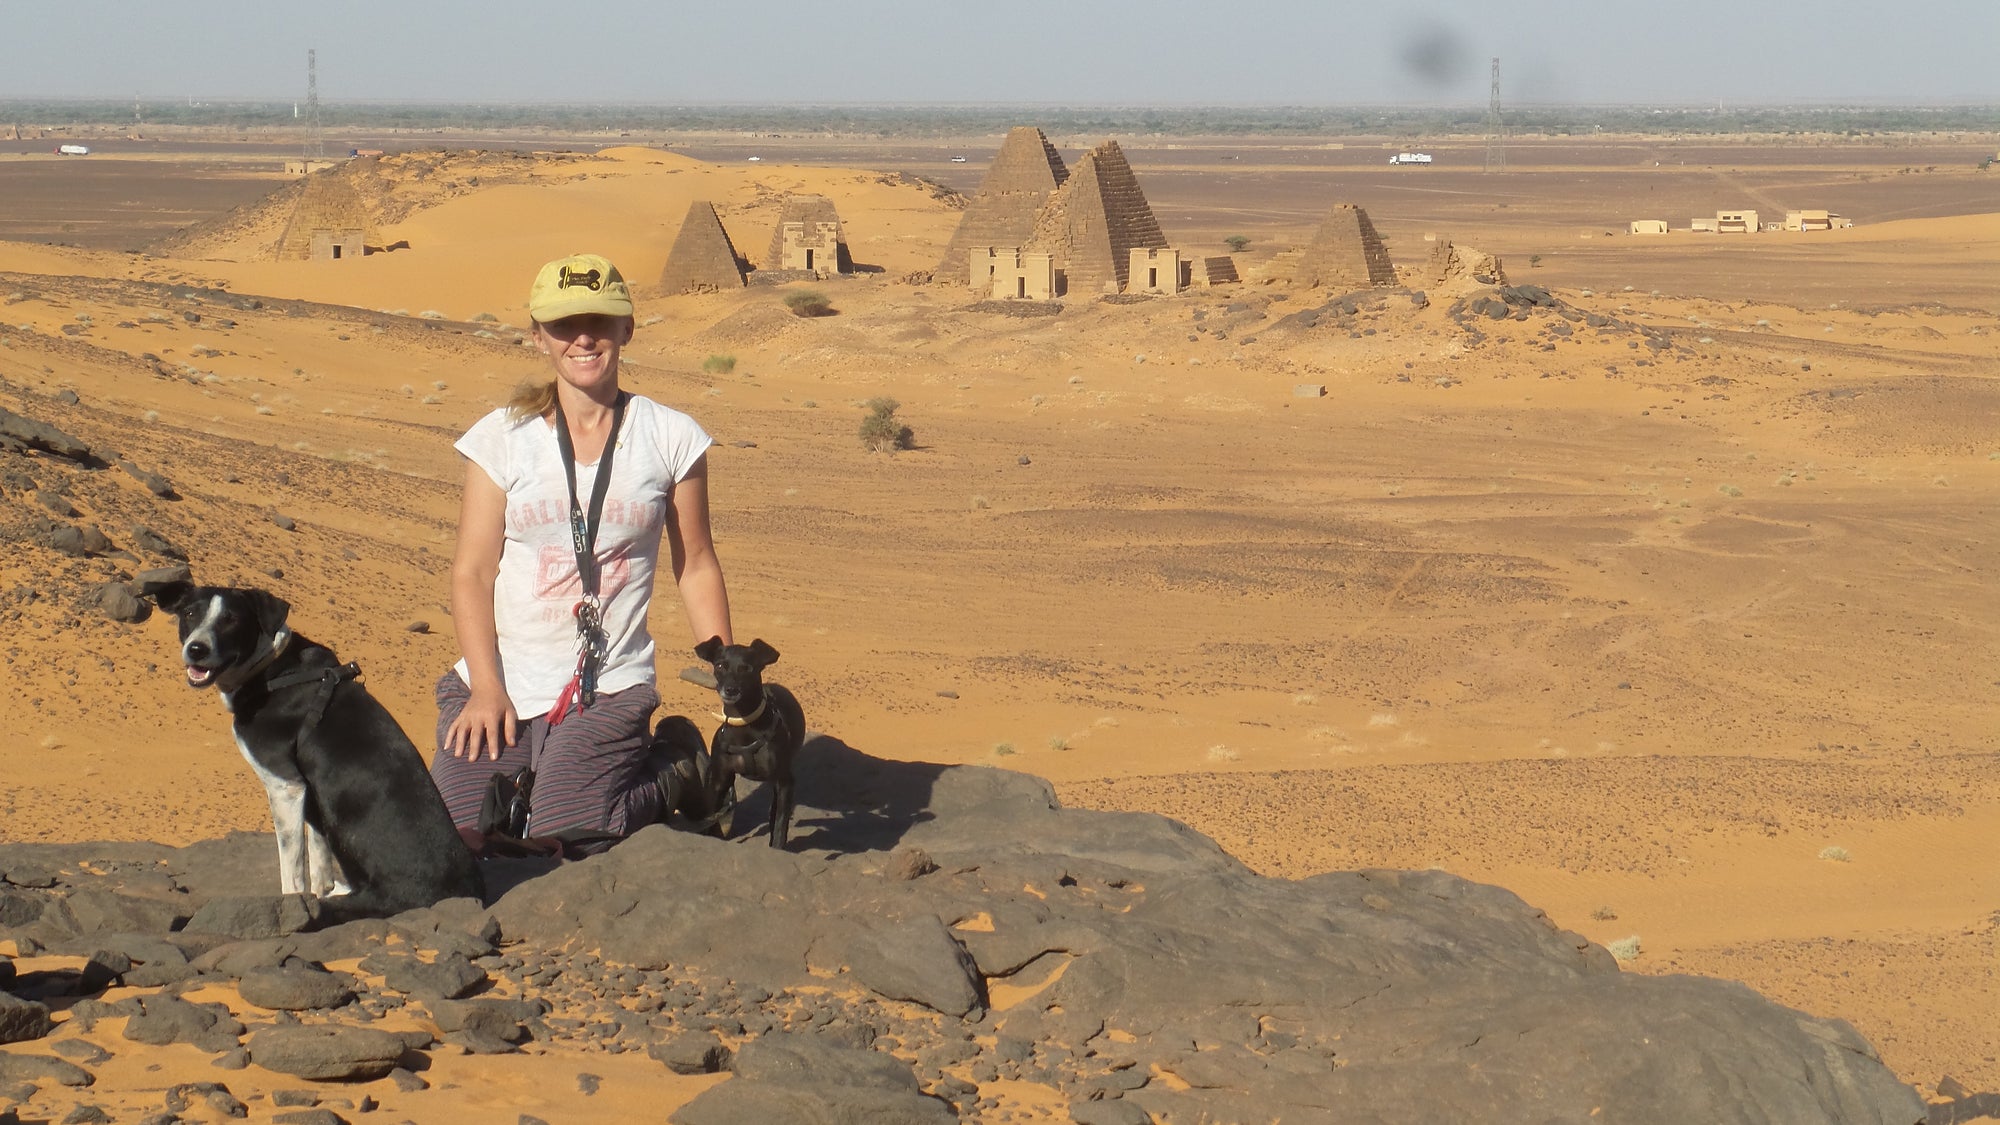 Sudan has many pyramid sites on the side of the highway. The Pack Track wild camped just near this site in the desert. Janell, Weeti and Shadow pictured here.